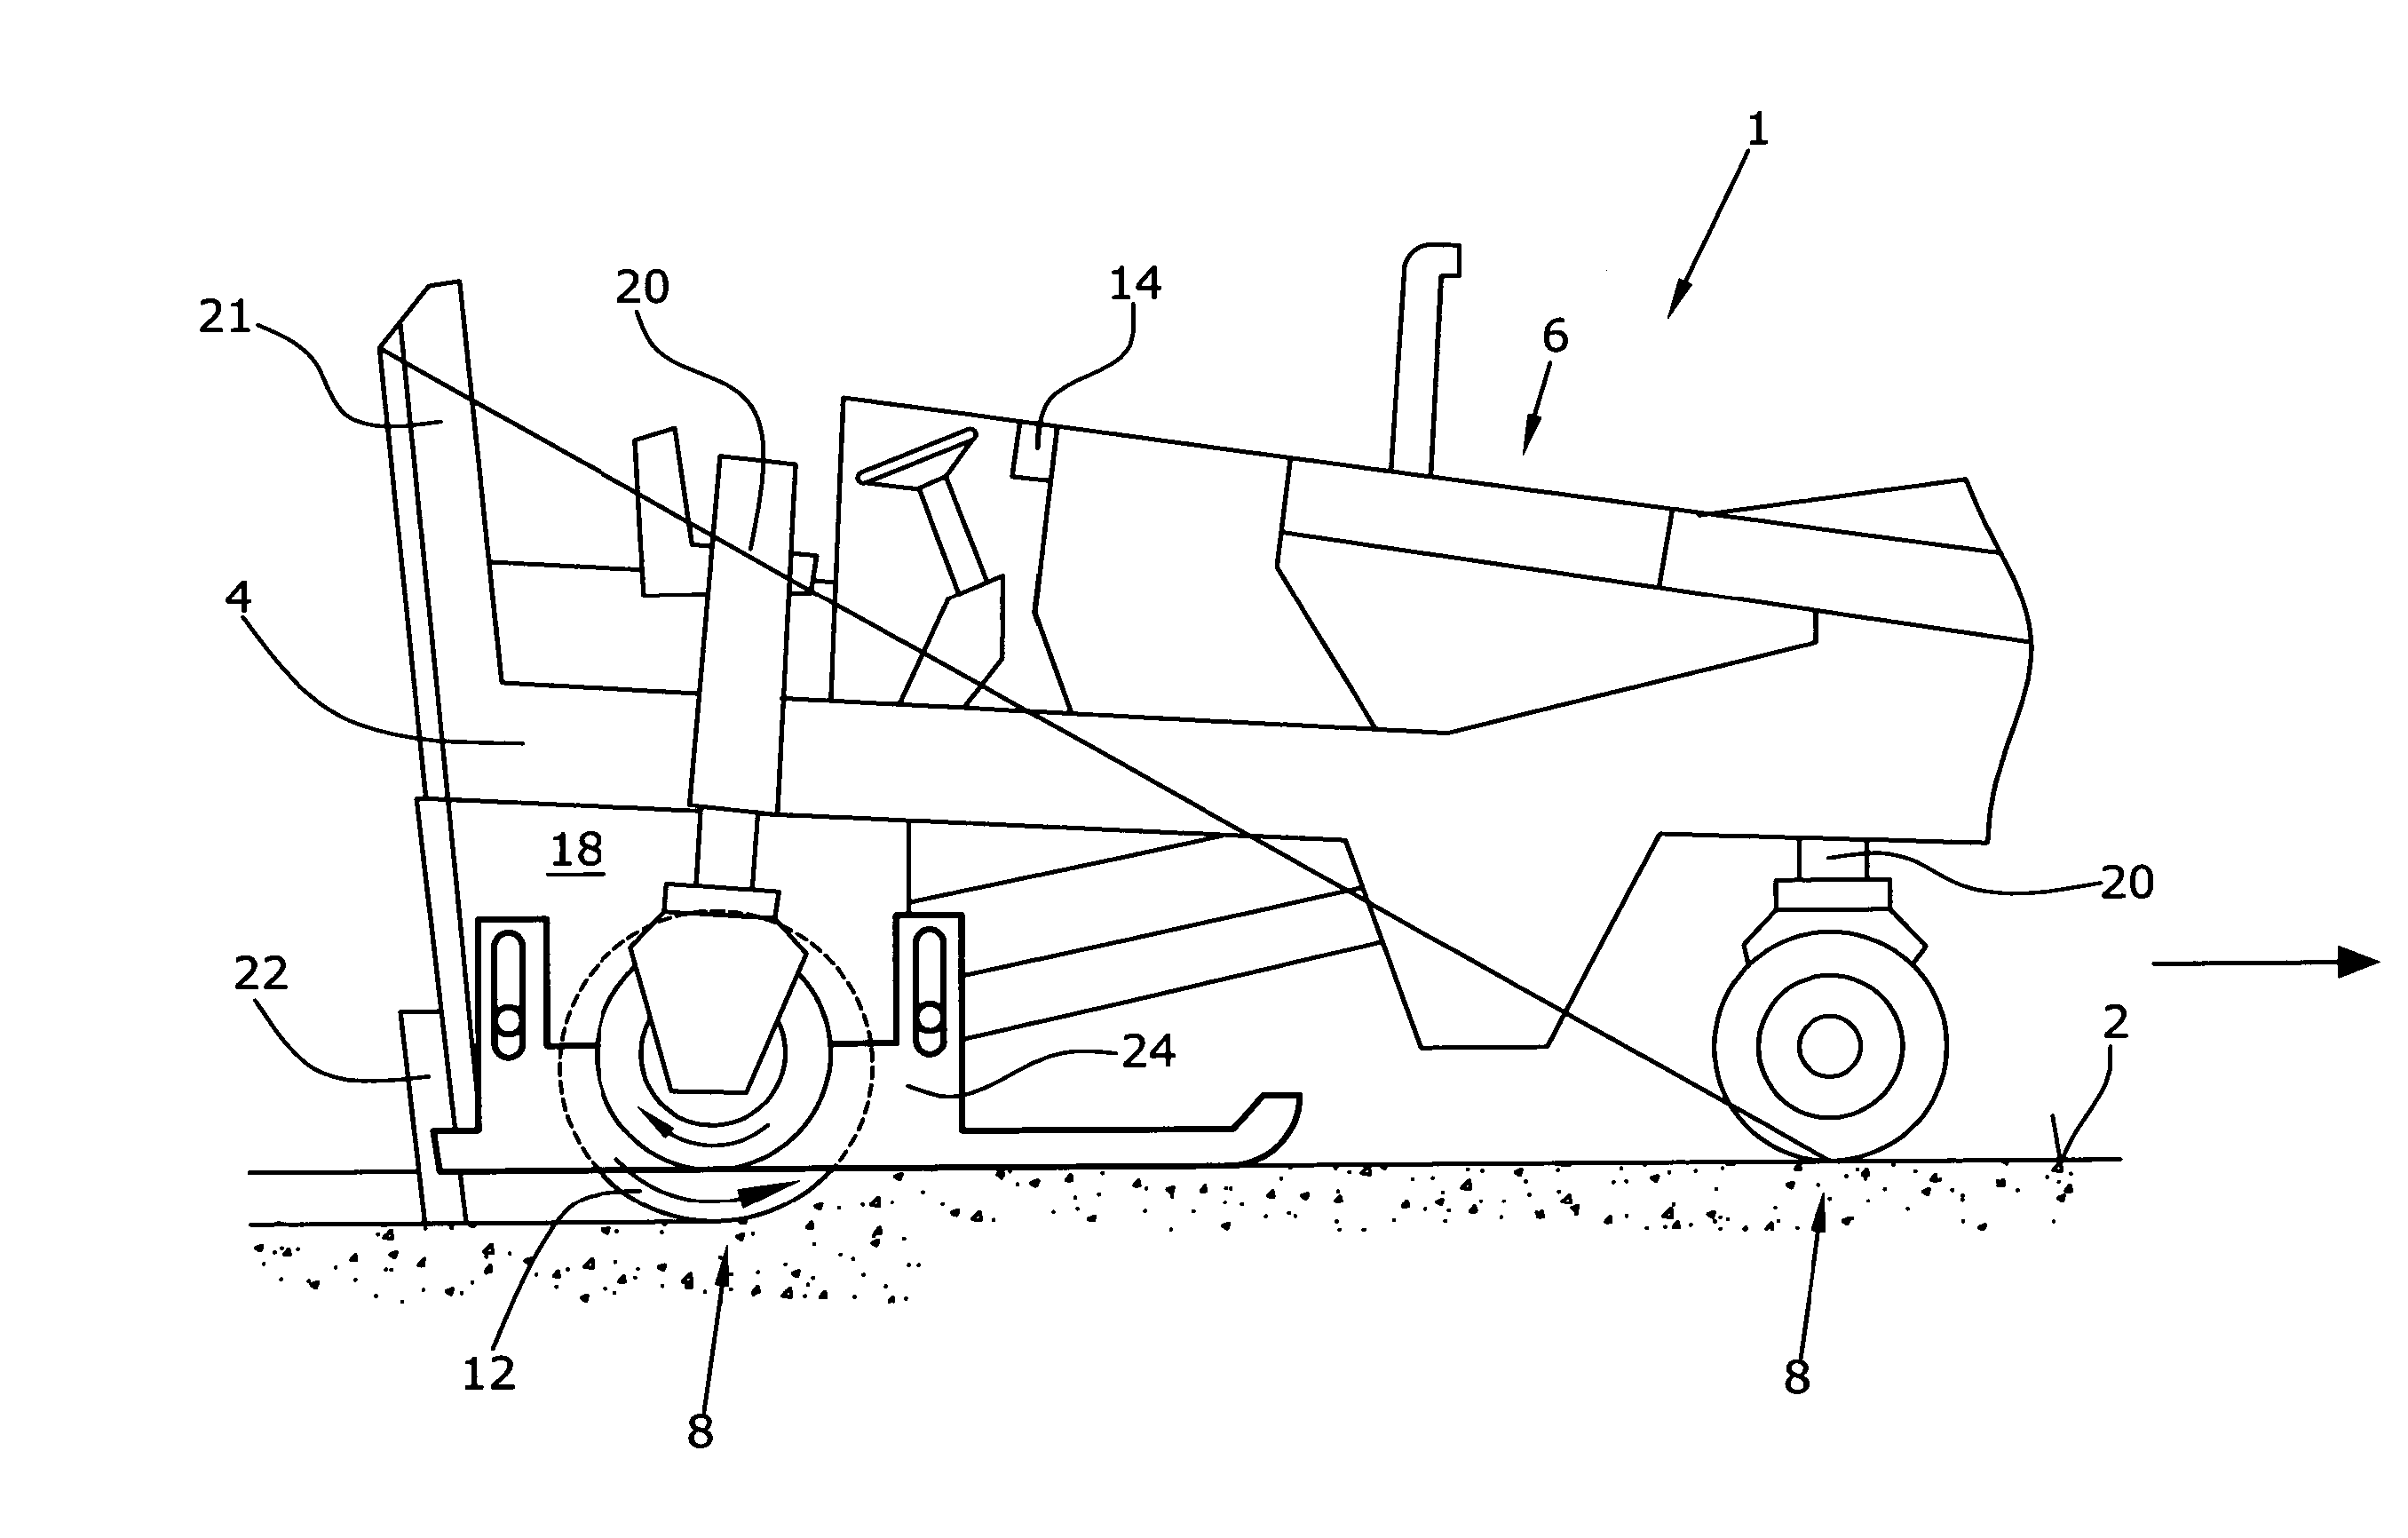 Automotive construction machine, as well as method for working ground surfaces